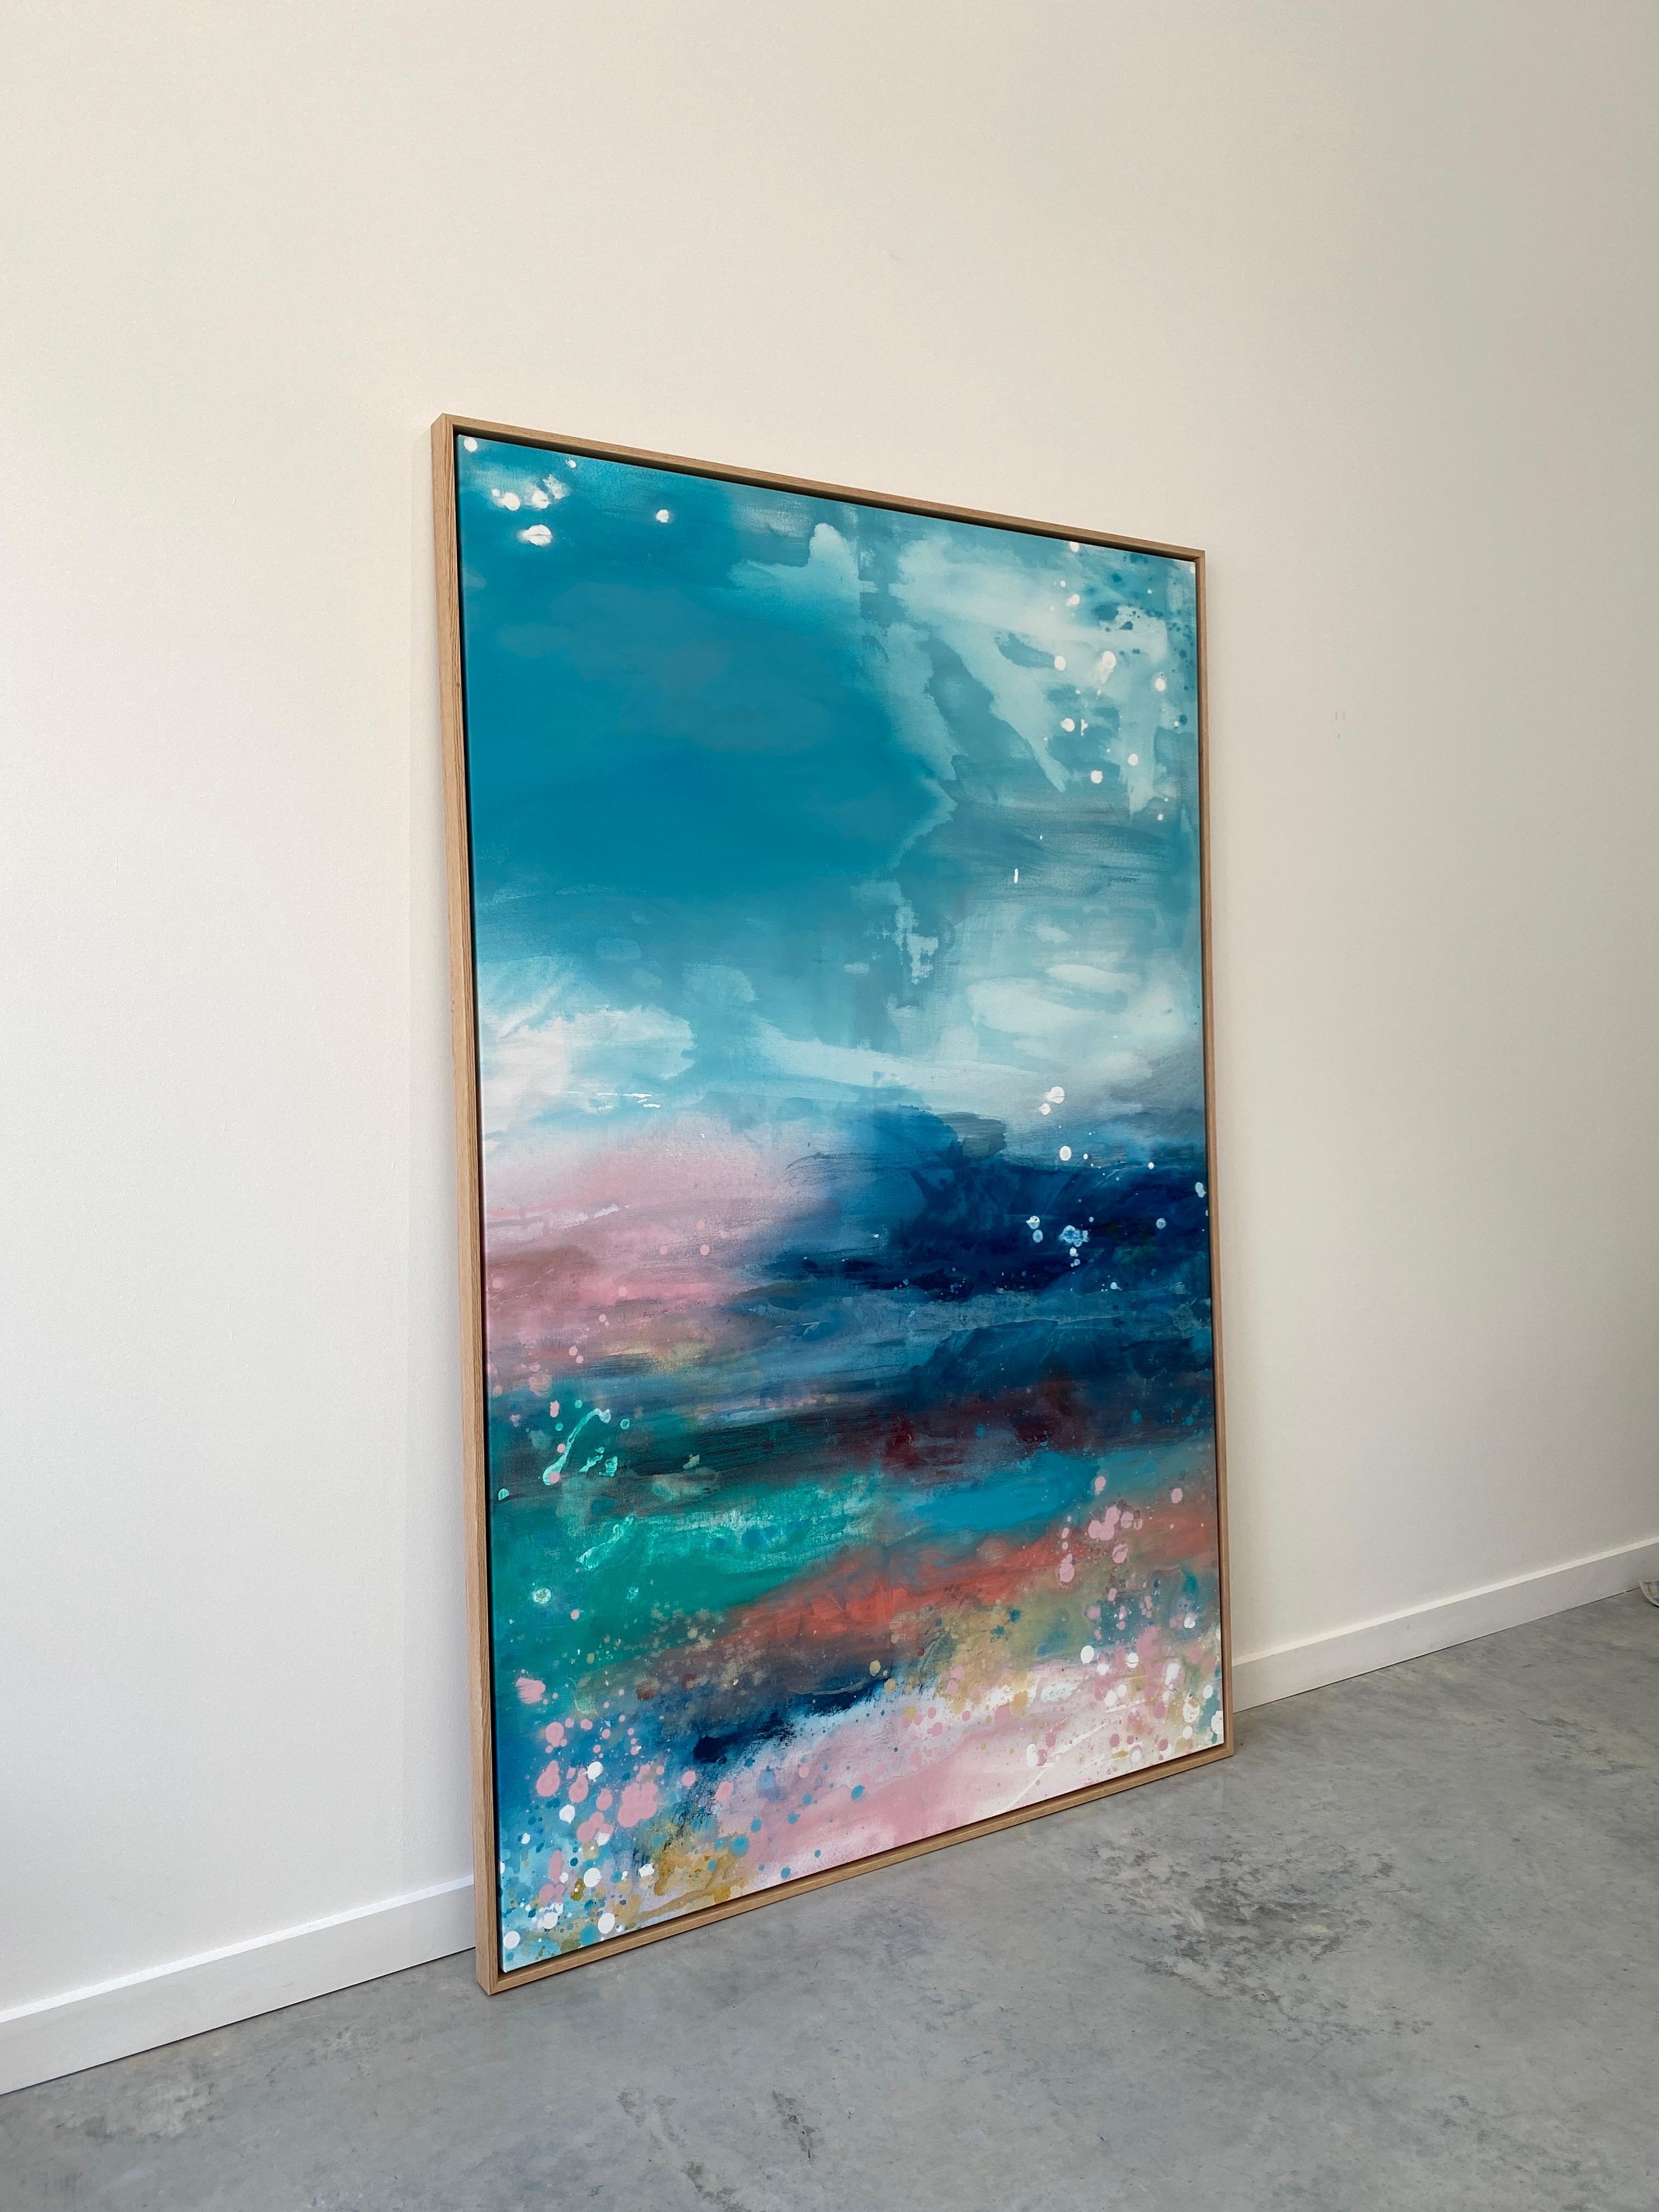 'Colourscape'

Brighten and enliven your space with this colorful expressive abstract landscape. Vibrant colours of joy alongside a bright Australian blue sky. Painterly detailed textures, layered paint, ghostly shadows and expressive energy vibrate